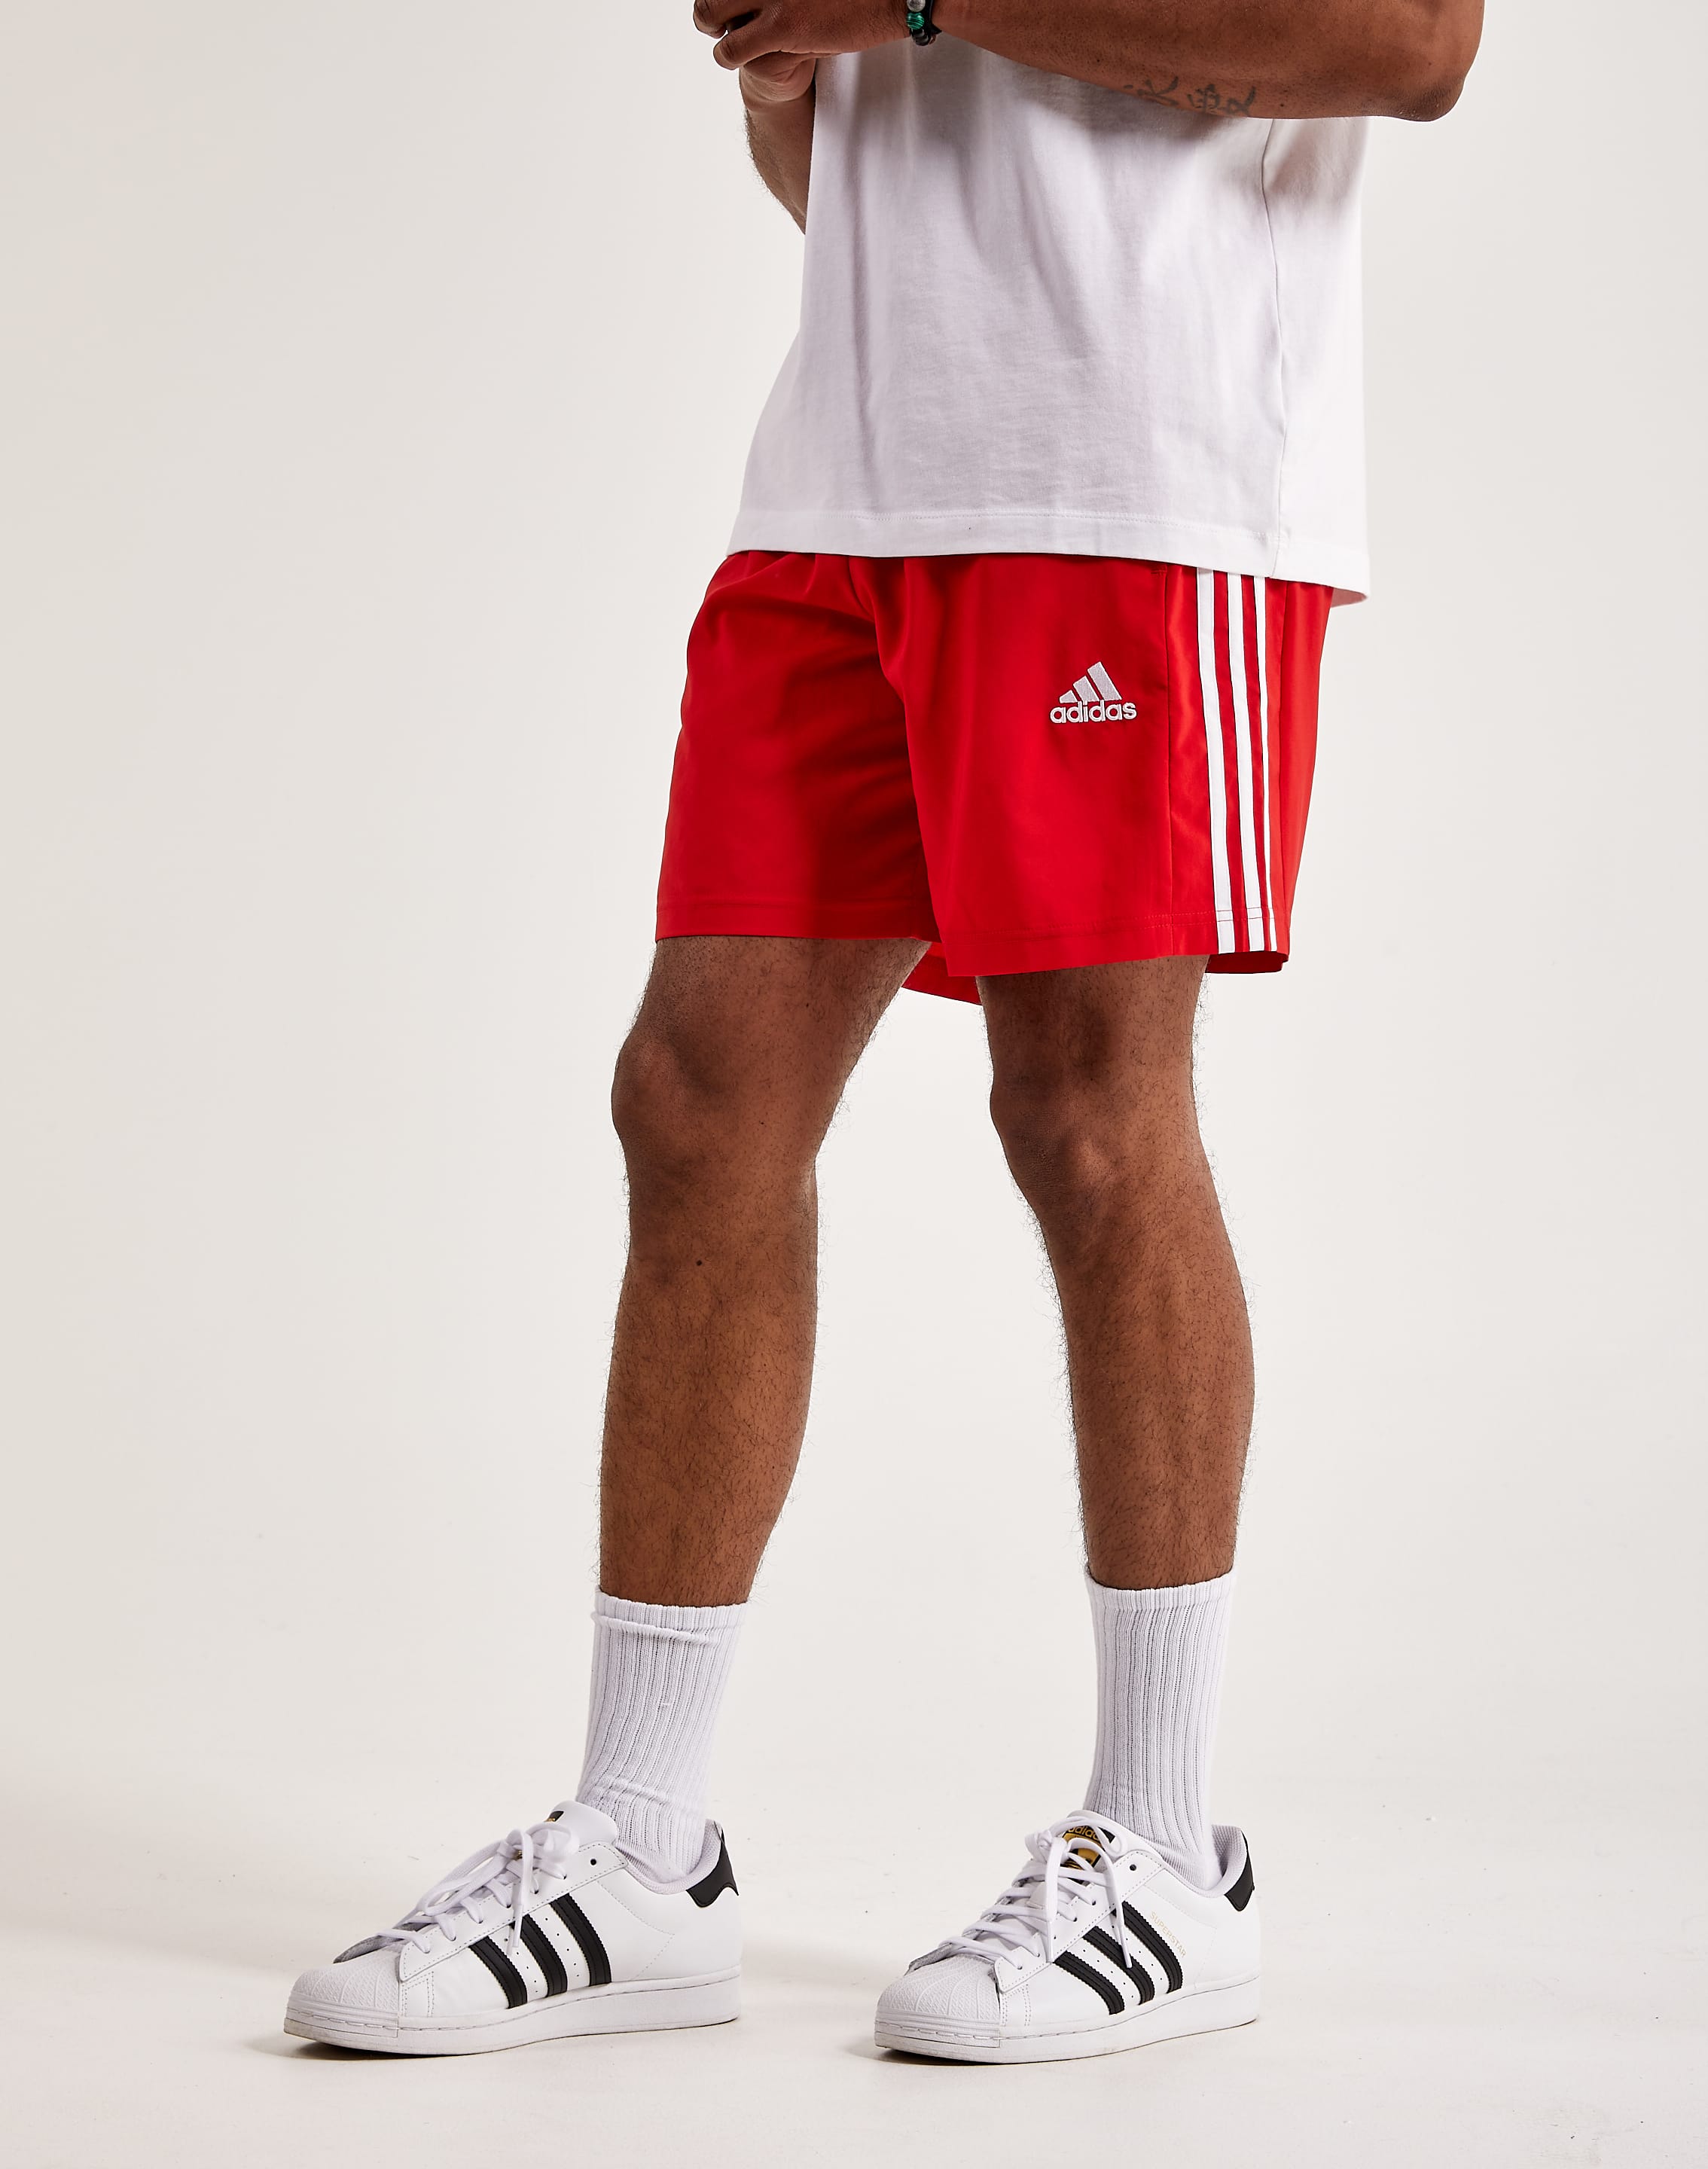 3-Stripes – Chelsea DTLR Shorts Adidas